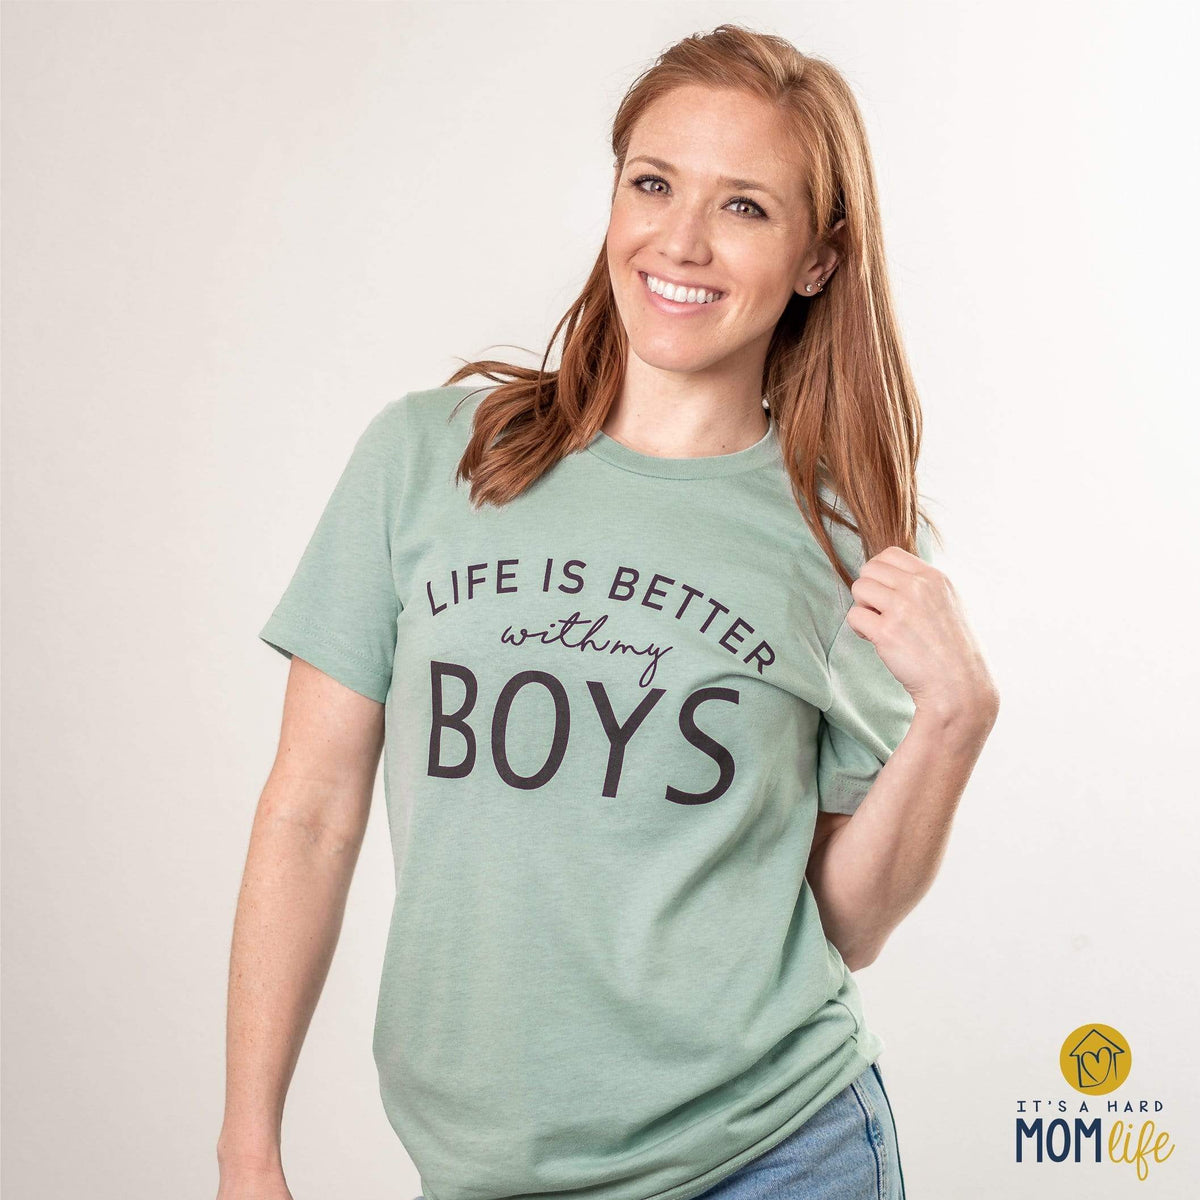 Love My Boys Women's Relaxed Crewneck Graphic T-Shirt Top Tee